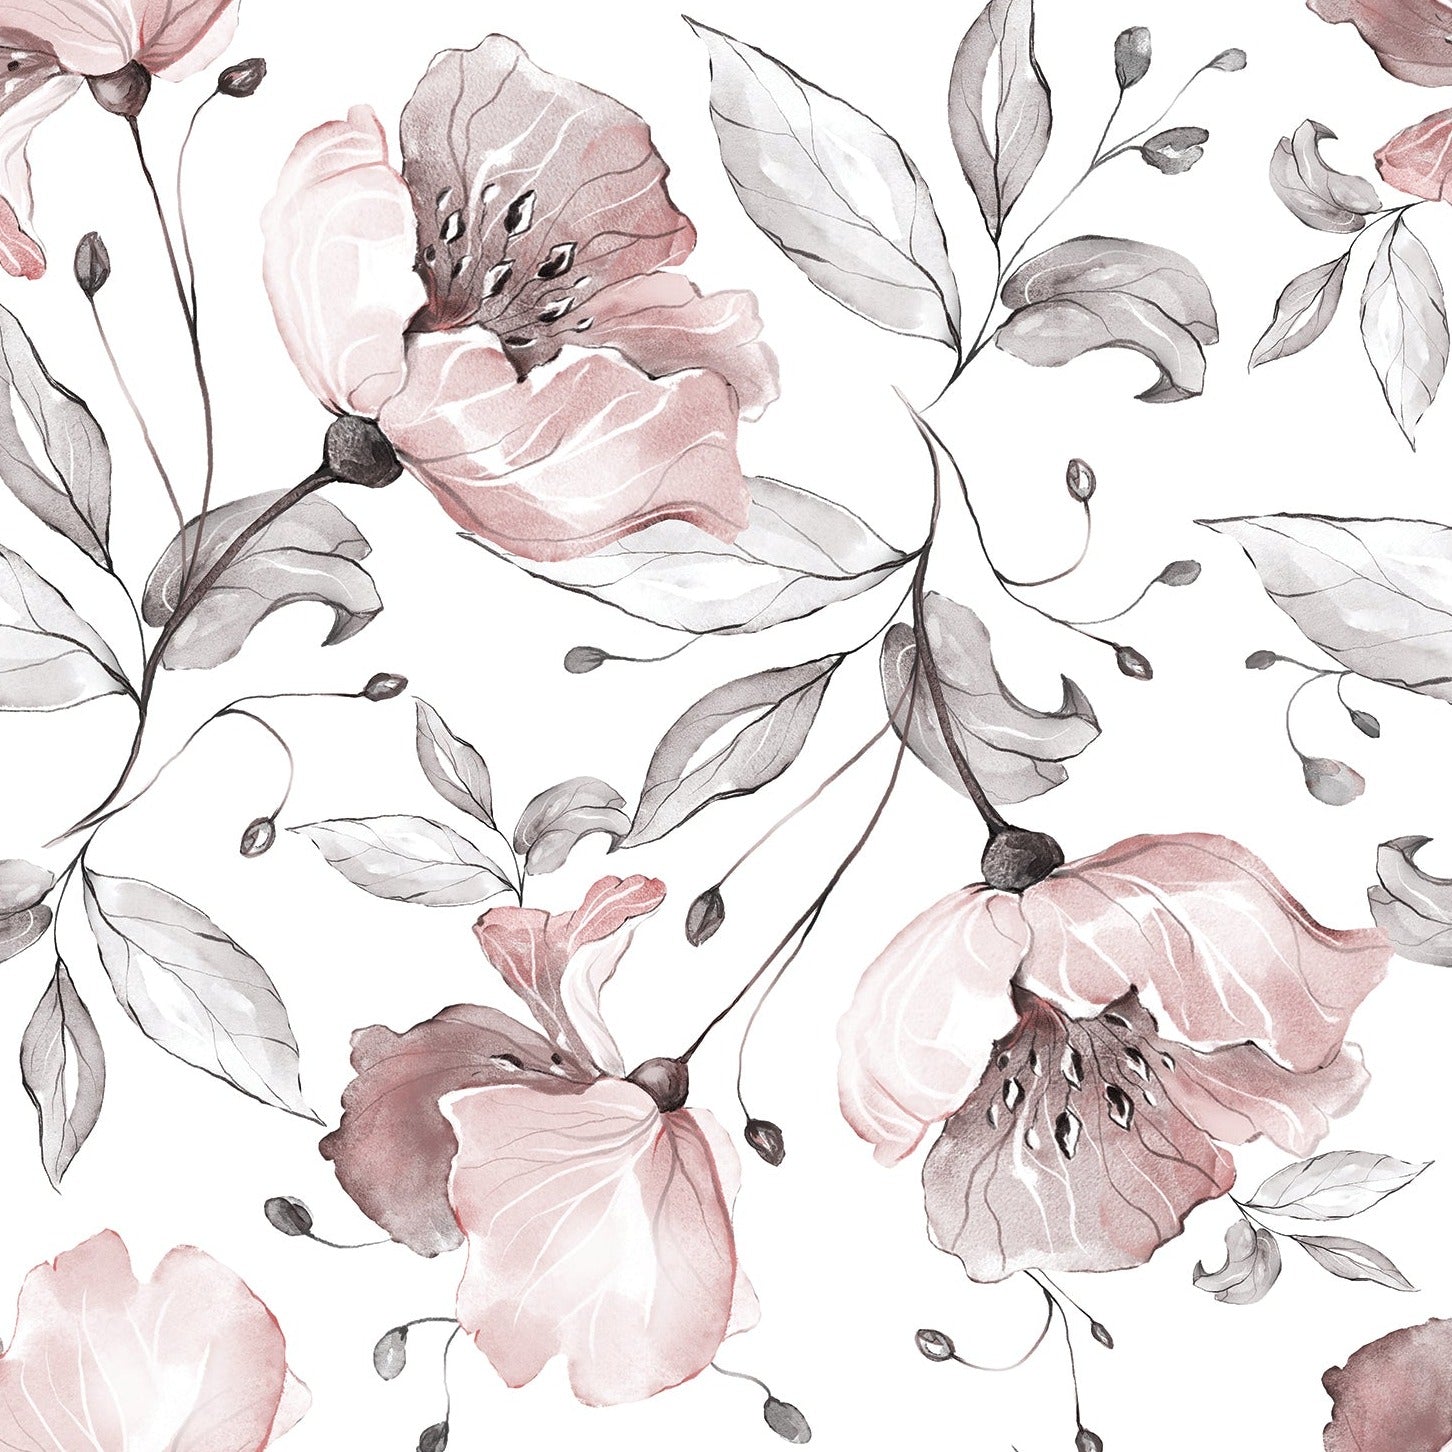 Close-up of Pink Watercolour Floral Wallpaper showcasing intricate watercolor details of pink flowers and grey leaves on a white background.